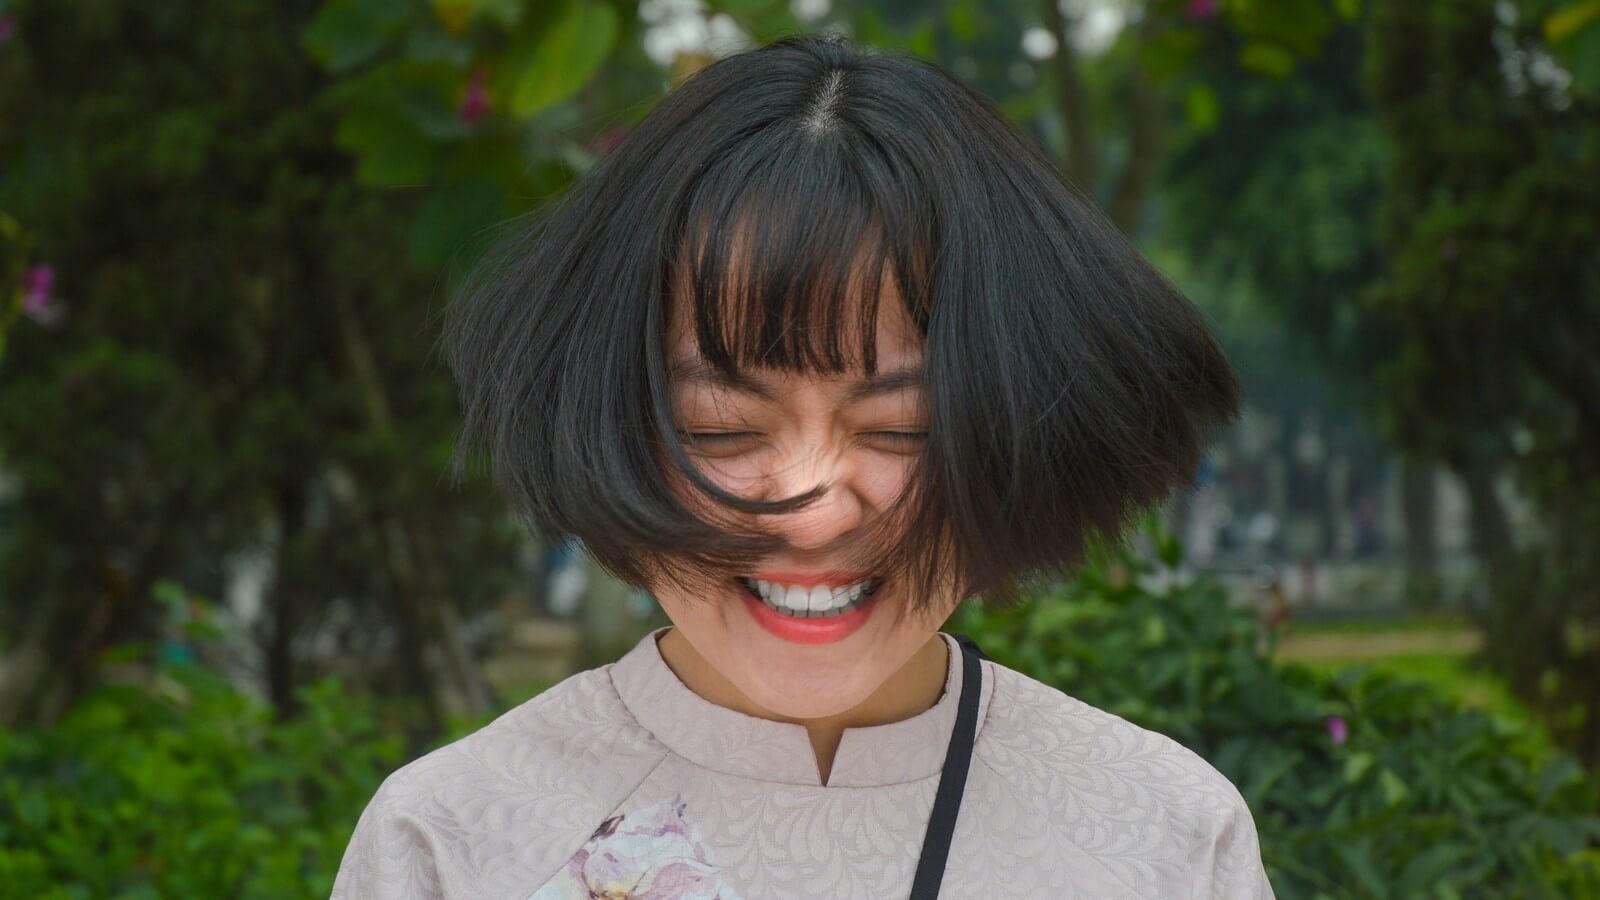 Woman with short hair shaking her head with a smile. 